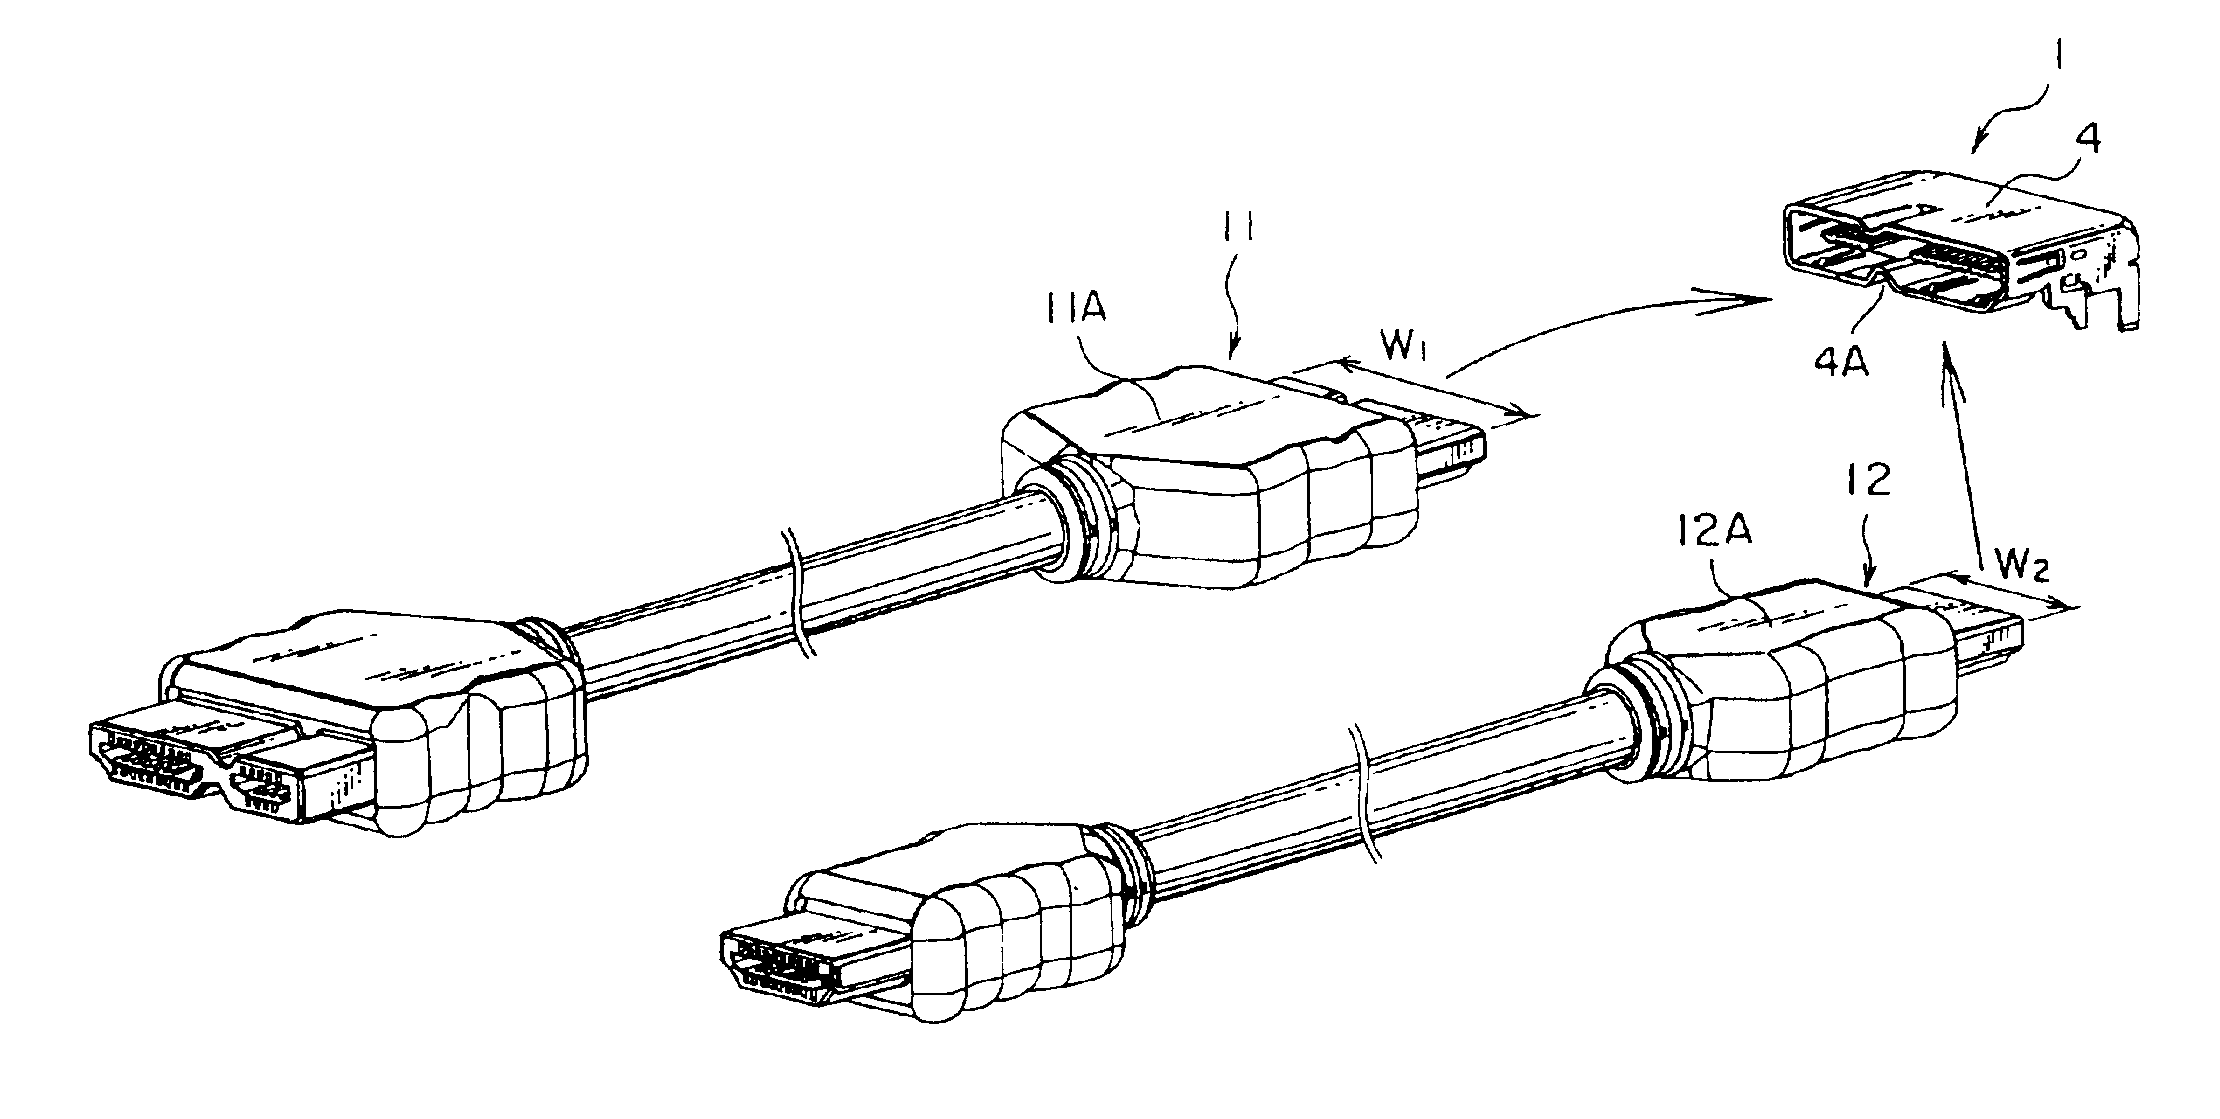 Connector for plural mating connectors having different shapes of interfaces